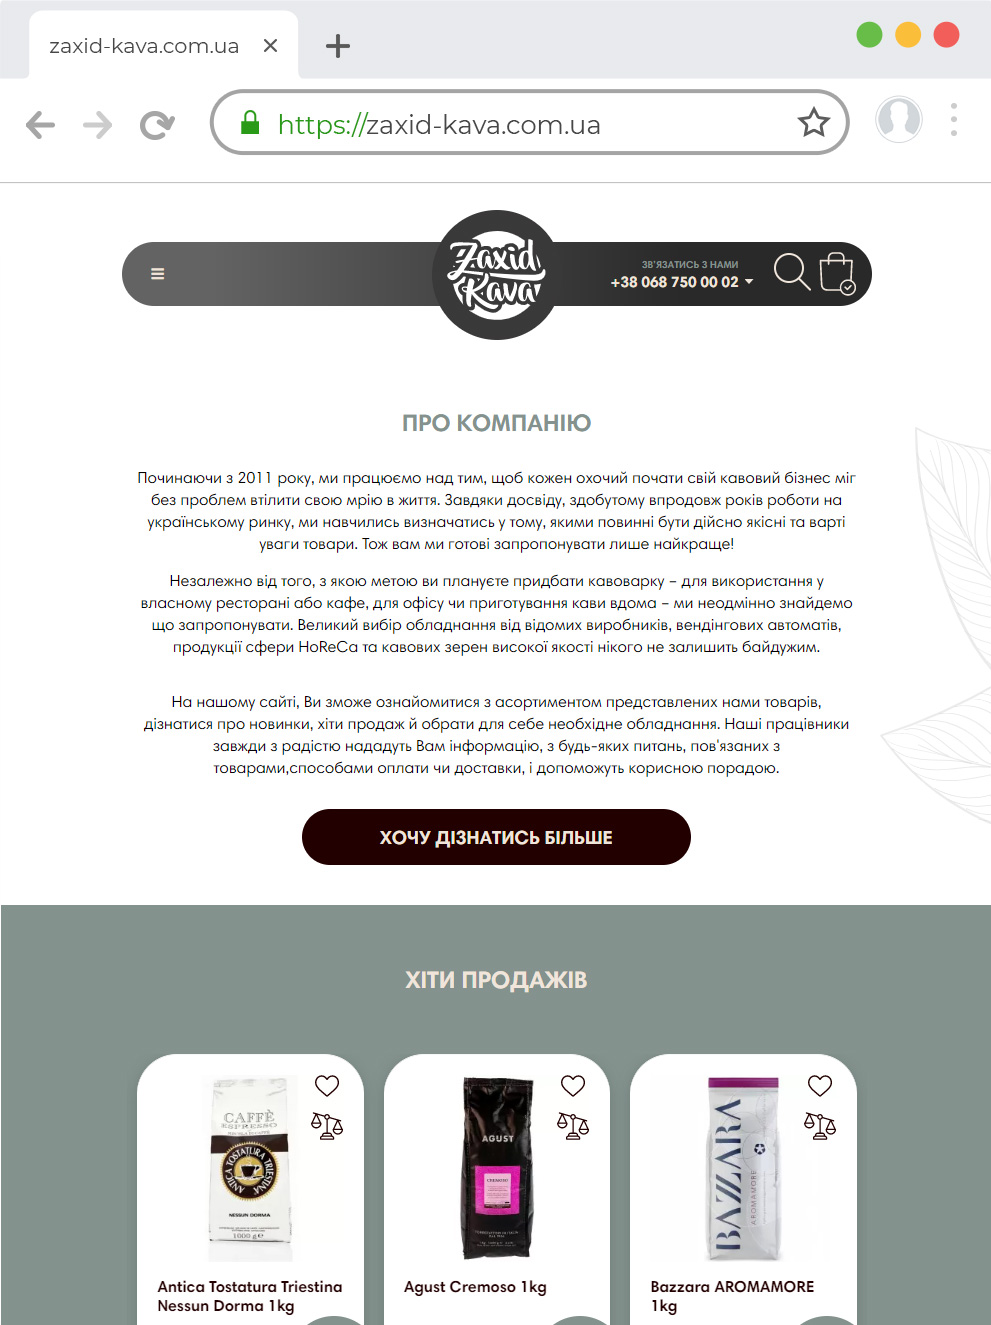 Development of an online store for the Zaxid Kava company on Ocstore